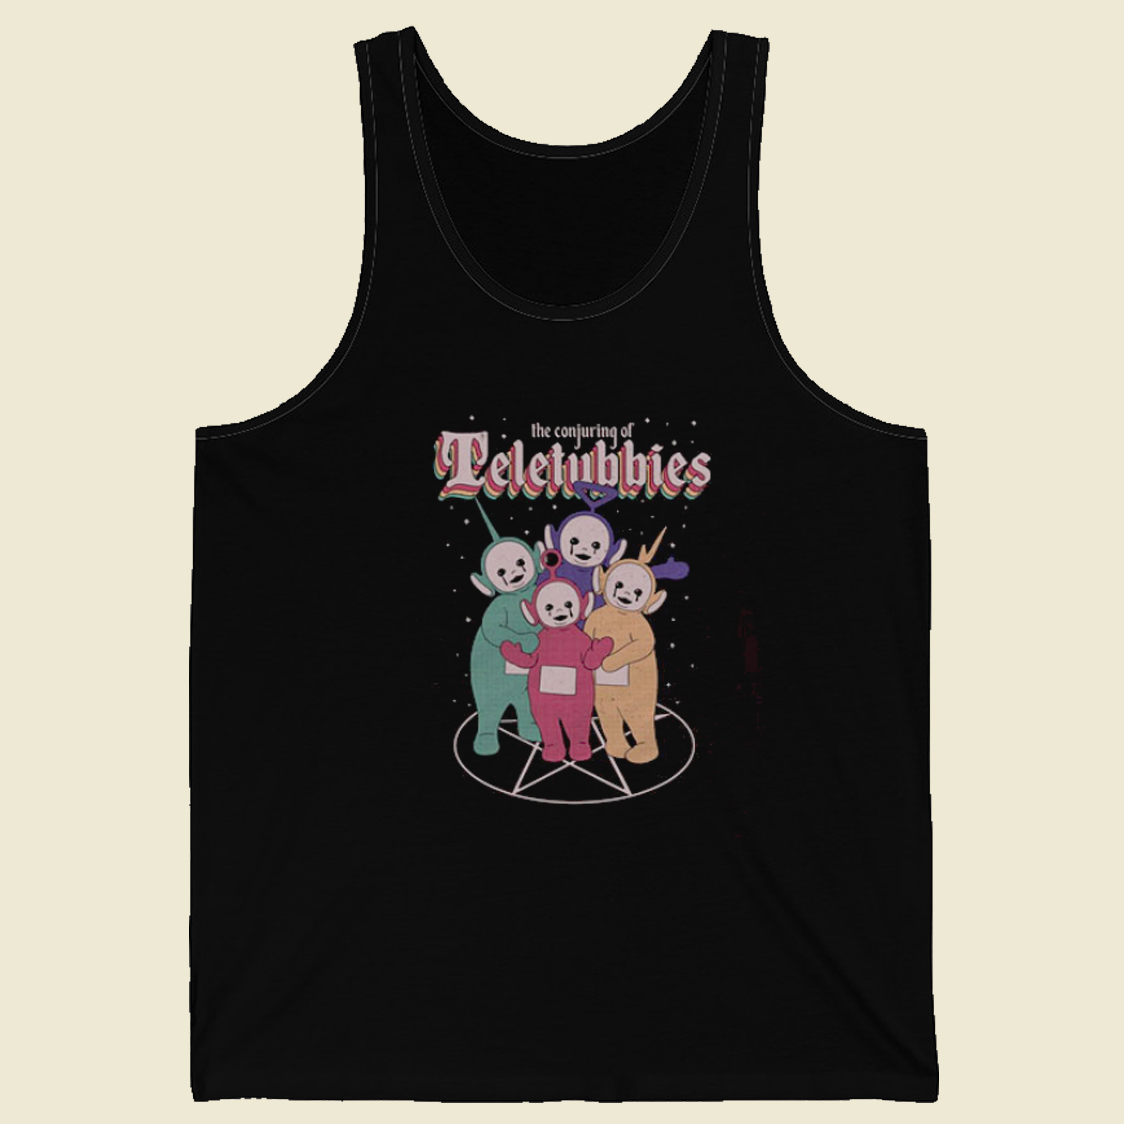 Of Teletubbies Top On Sale | Grltee.com